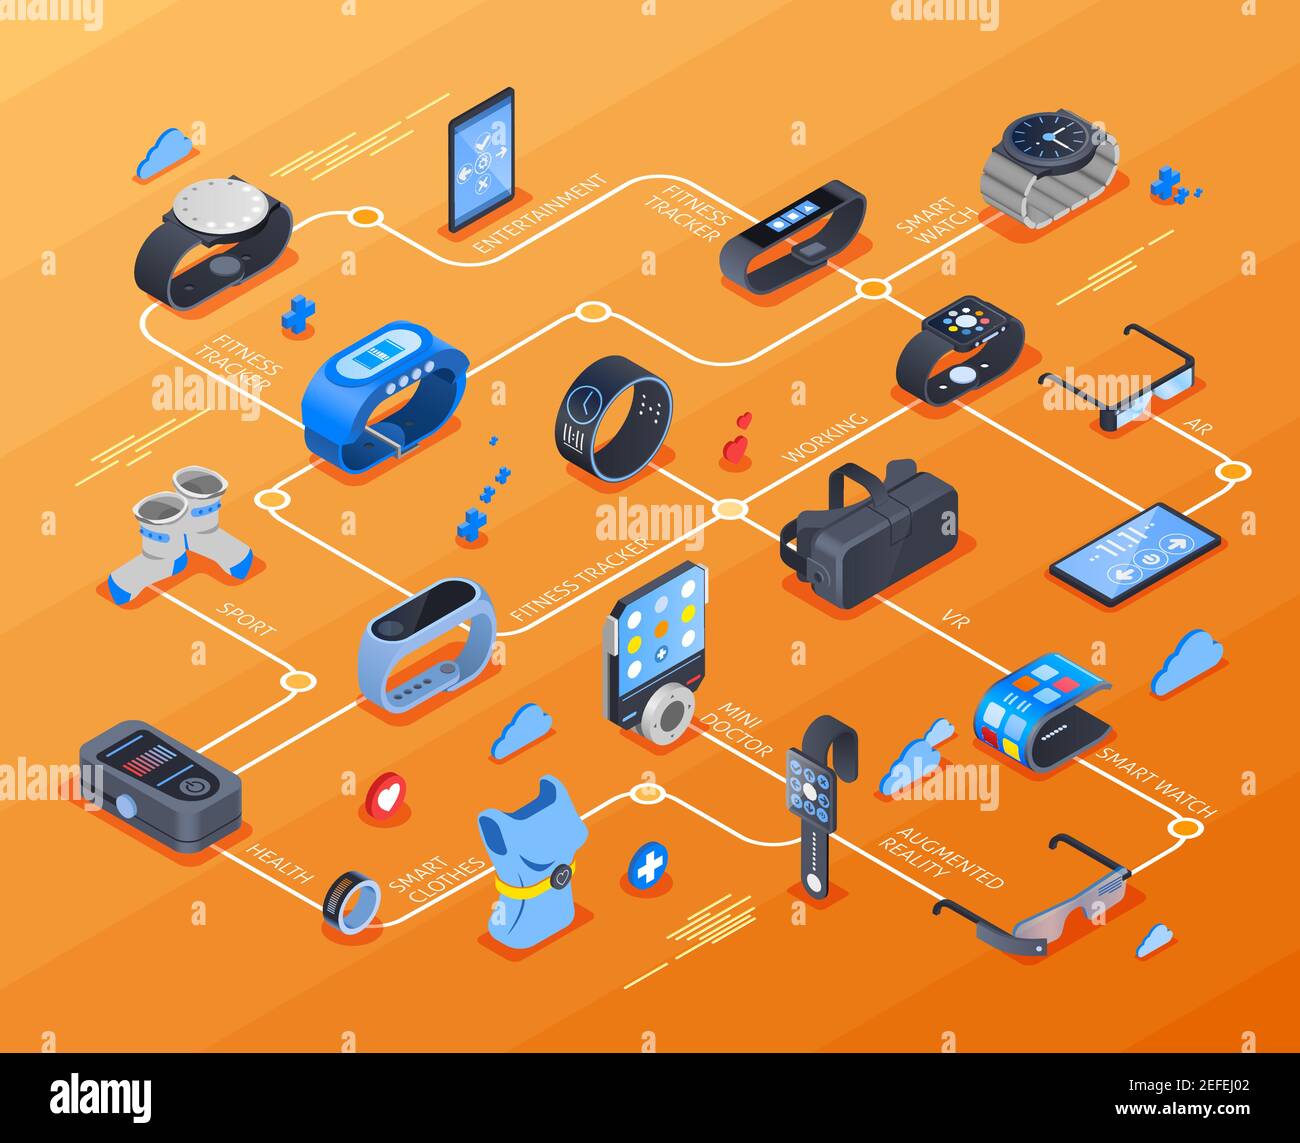 Wearable technology isometric flowchart with fitness trackers, health devices, augmented reality glasses on orange background vector illustration Stock Vector